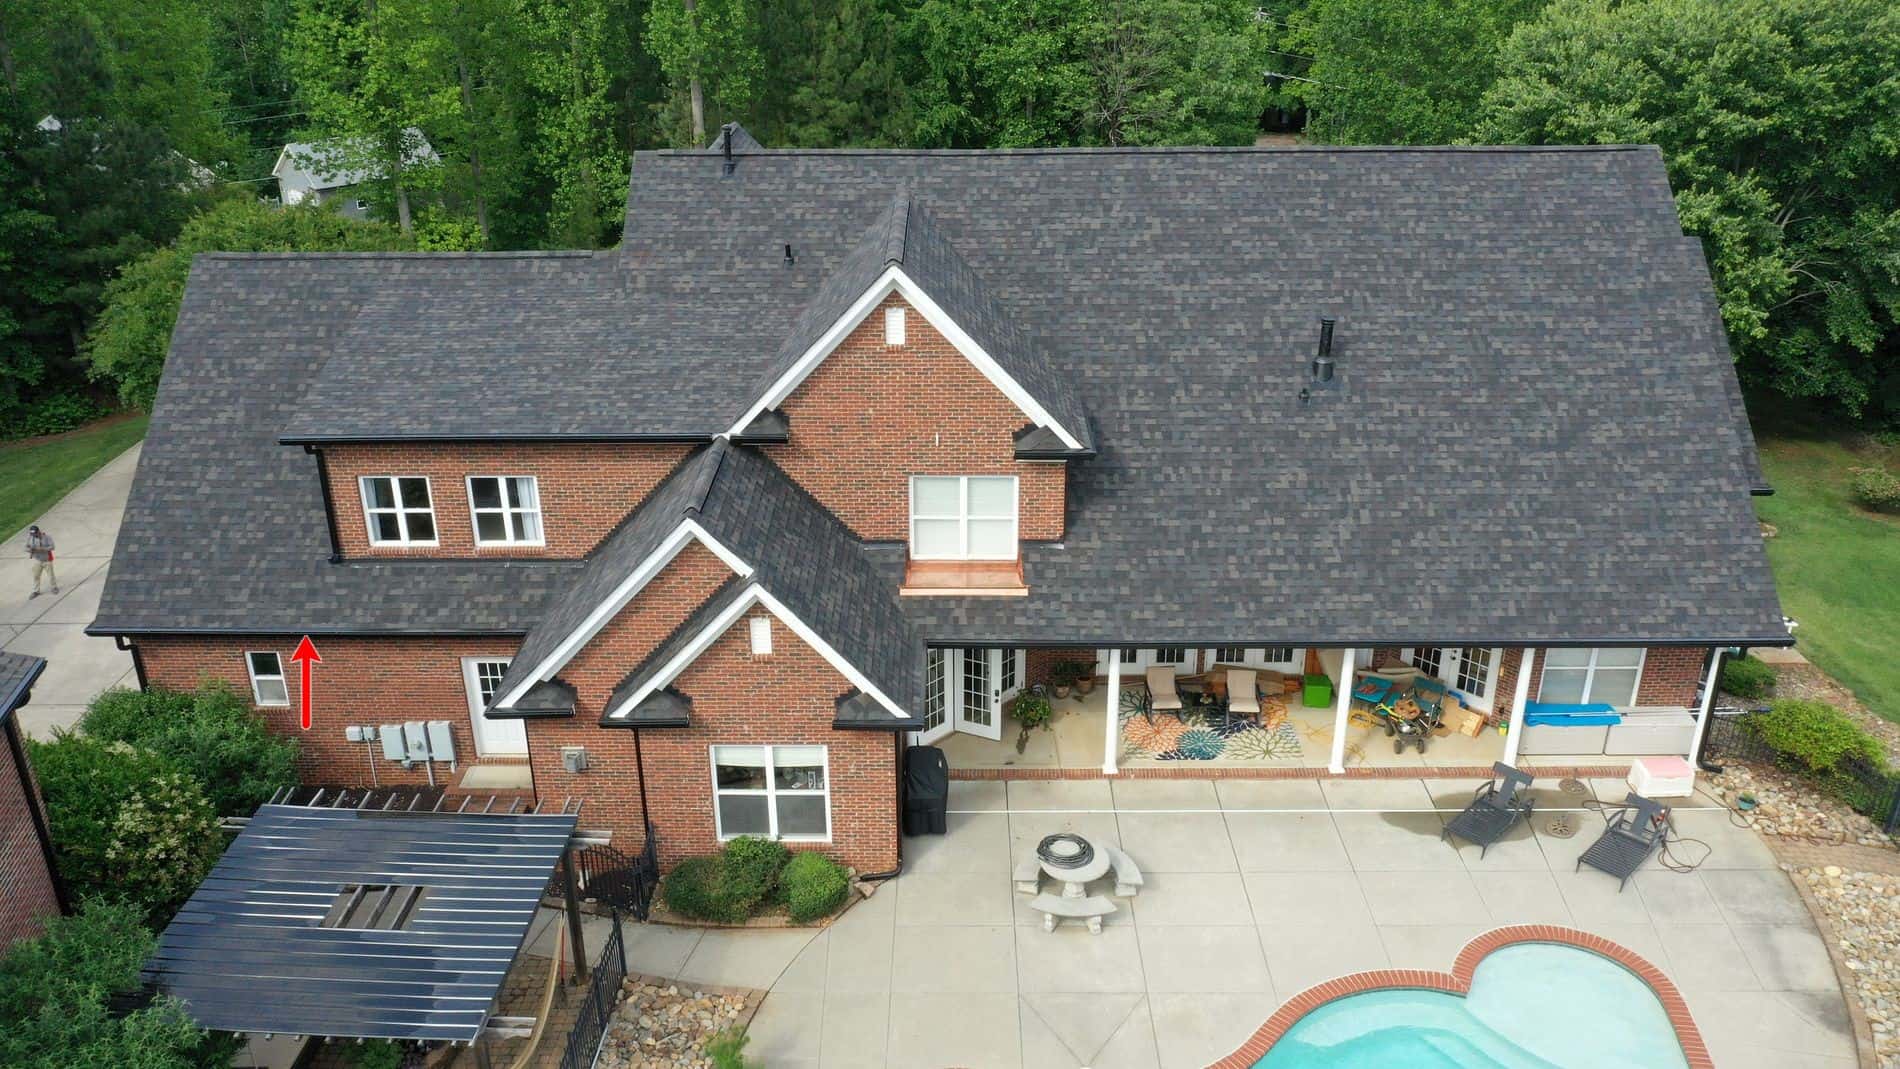 http://aerial%20view%20of%20backyard%20with%20pool%20in%20brick%20home